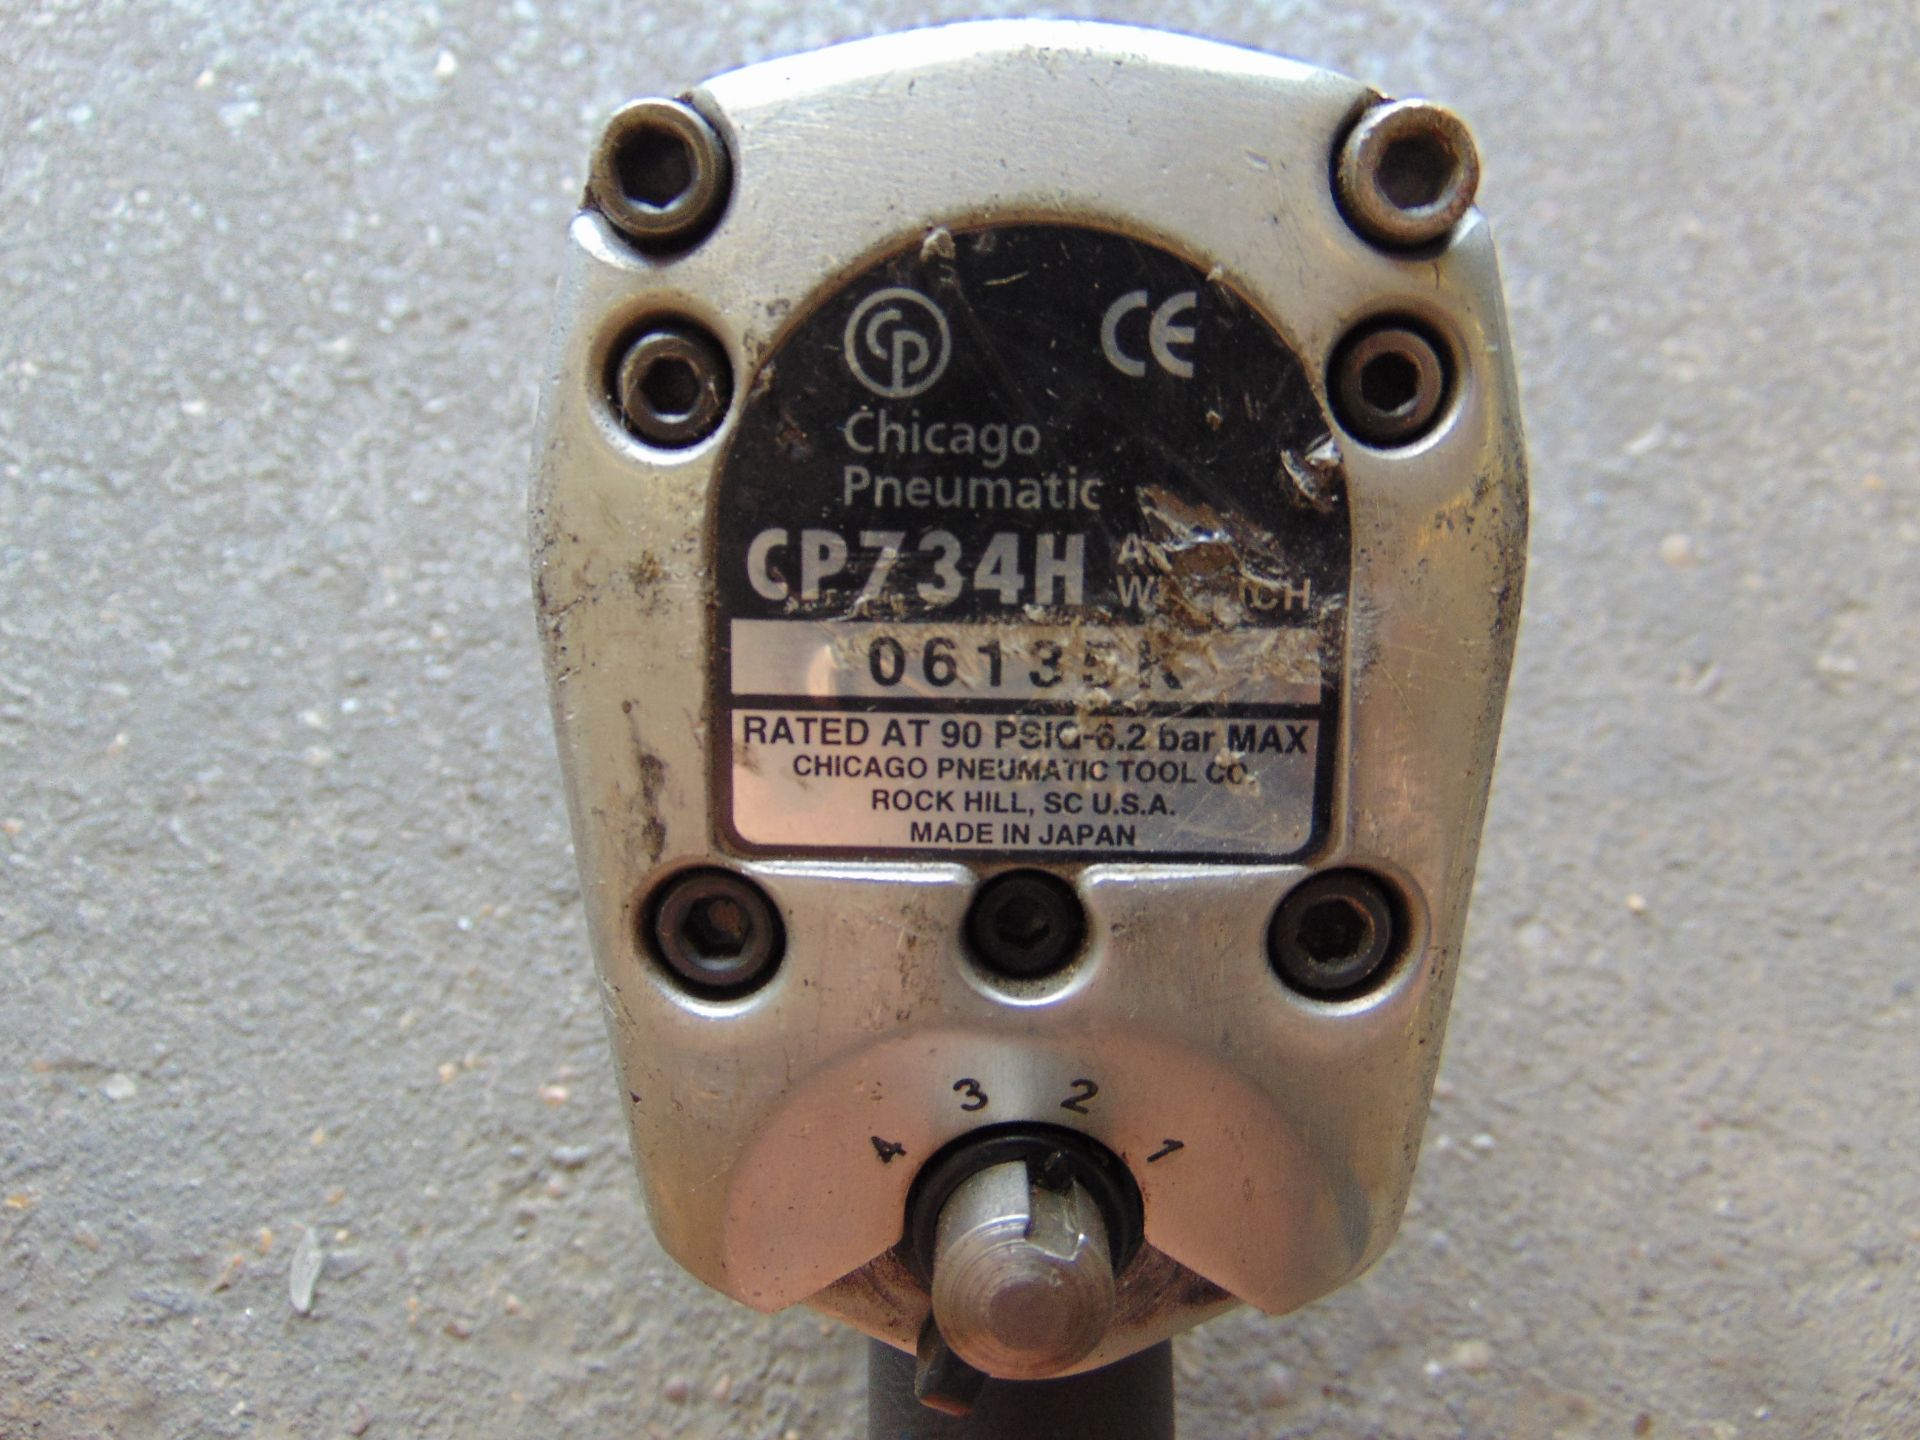 Chicago Power CP734H Pneumatic 1/2" Impact Wrench - Image 5 of 5